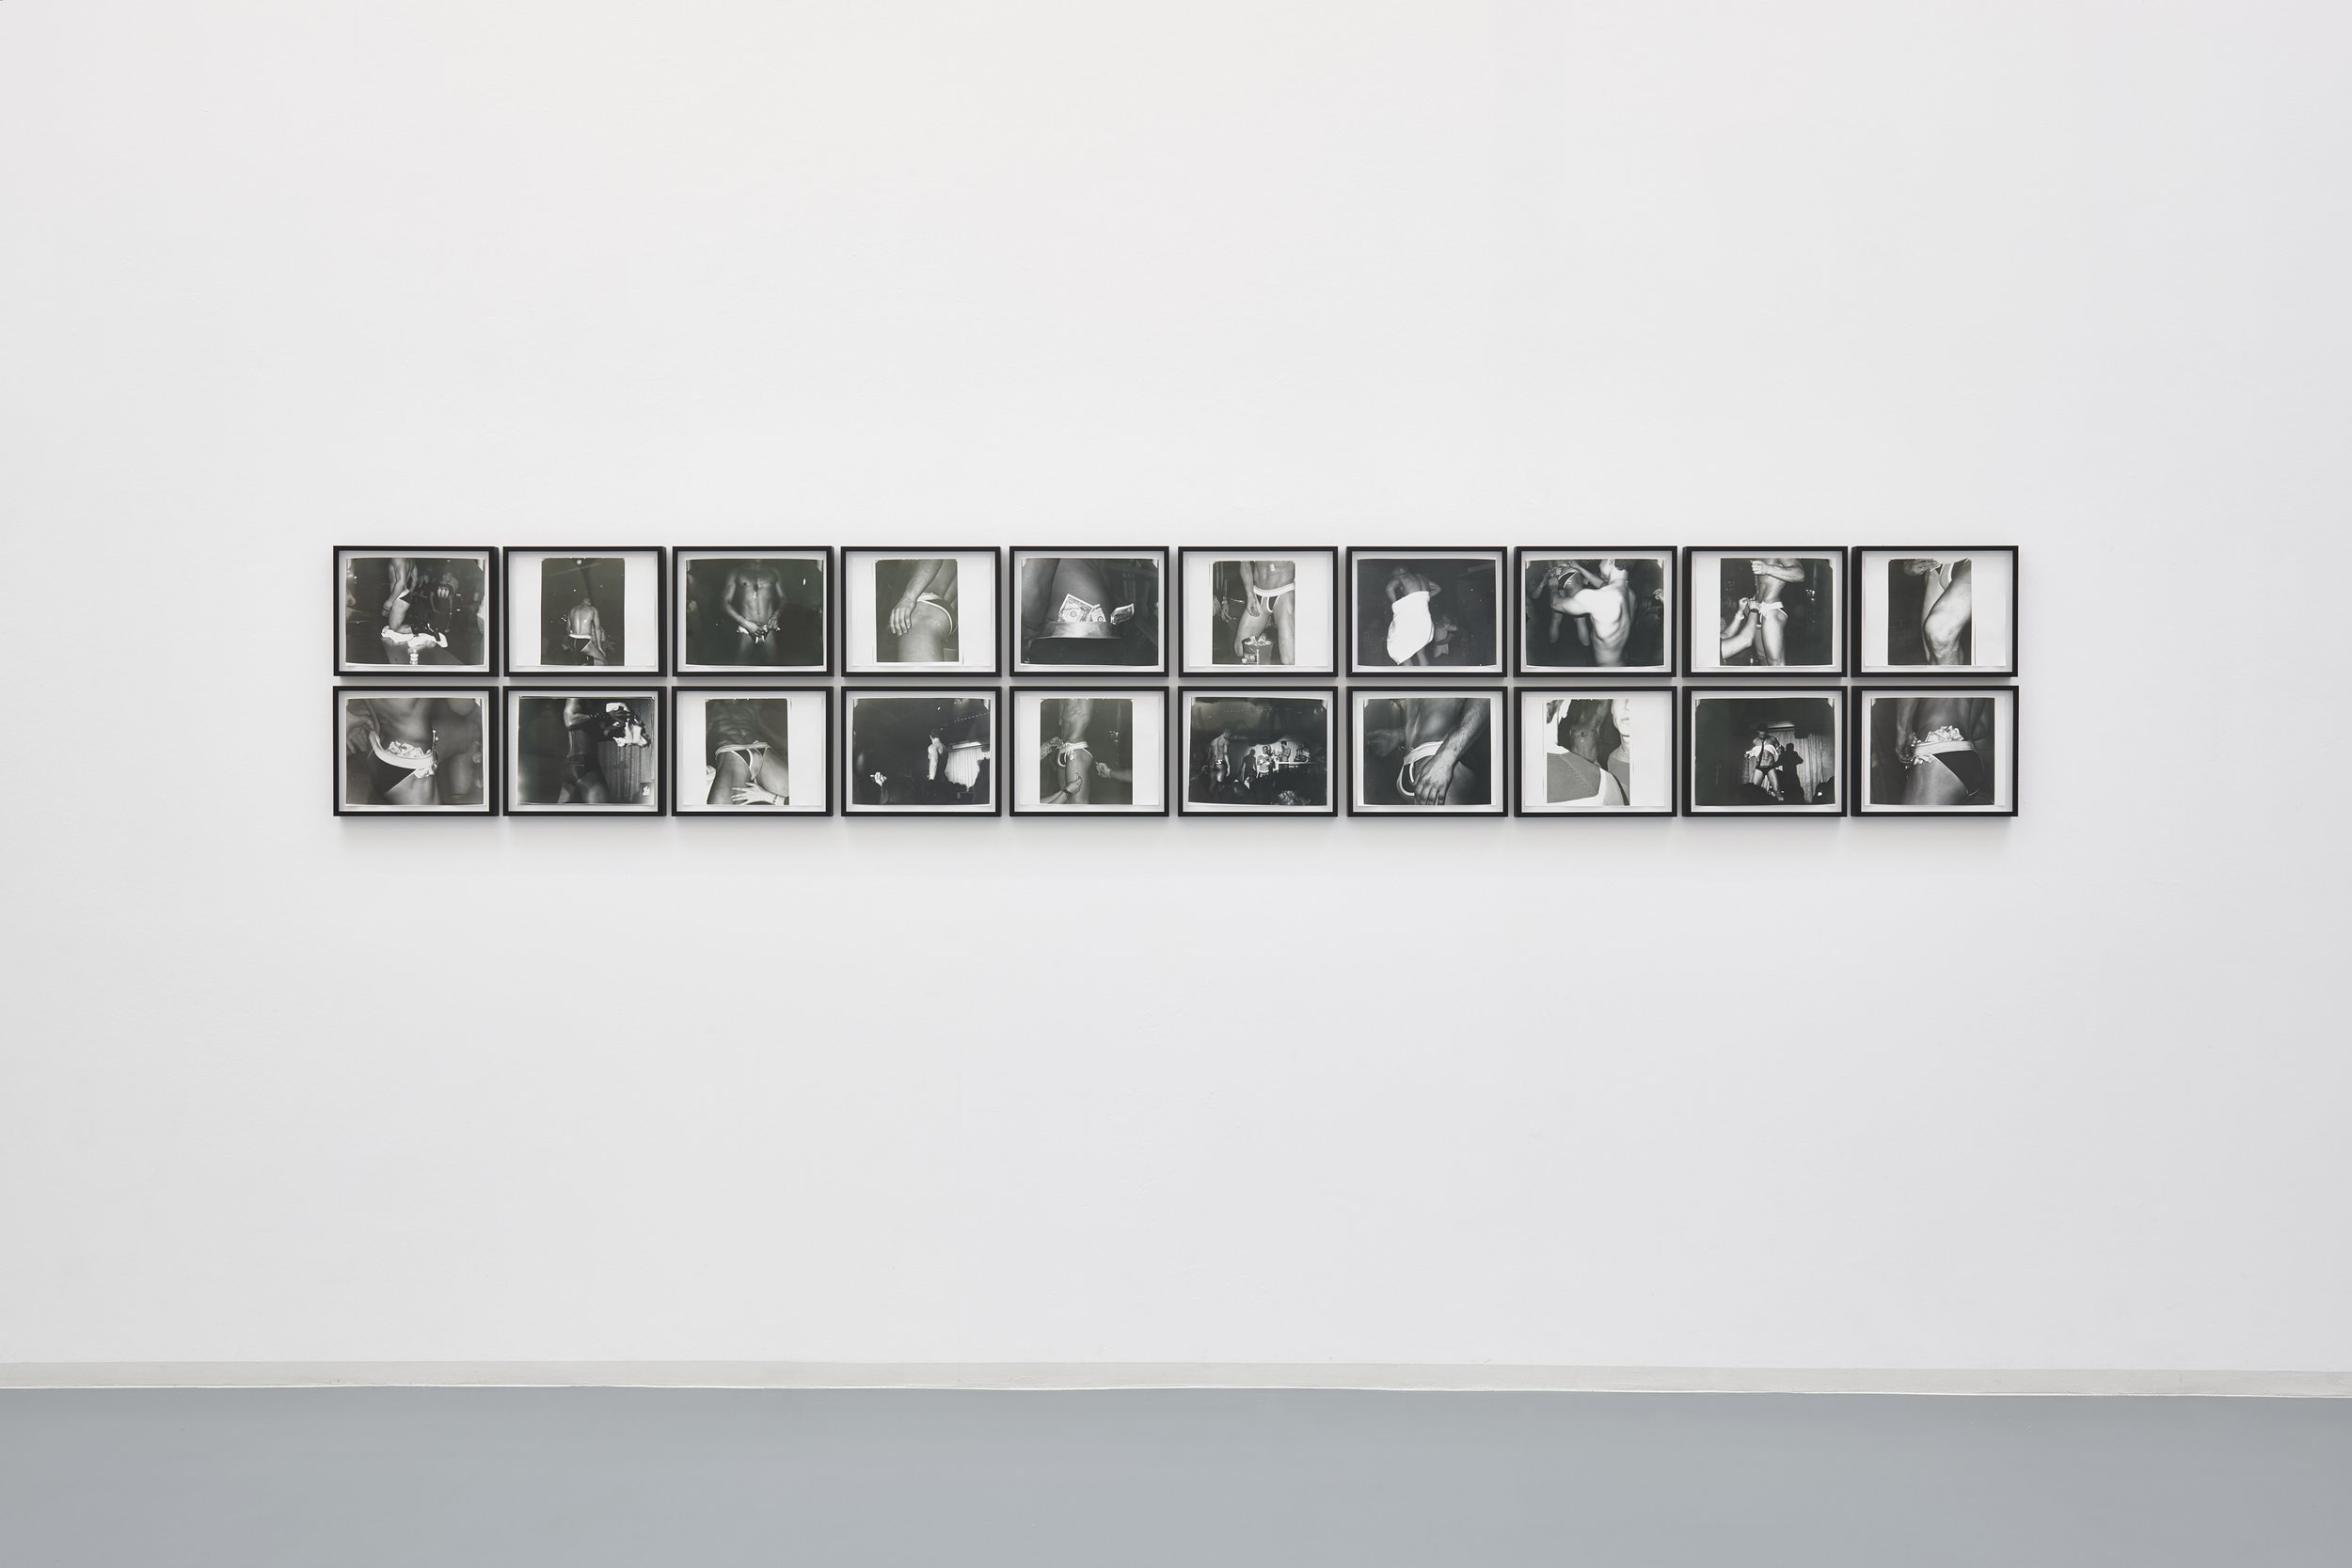  Splashed Memory of a Night Out, a series of 20 digital images transformed into Black and White photographs developed in a dark room, 24 X 30cm each,  2010 - 2018.   Installation shot from Bonner Kunstverein.  